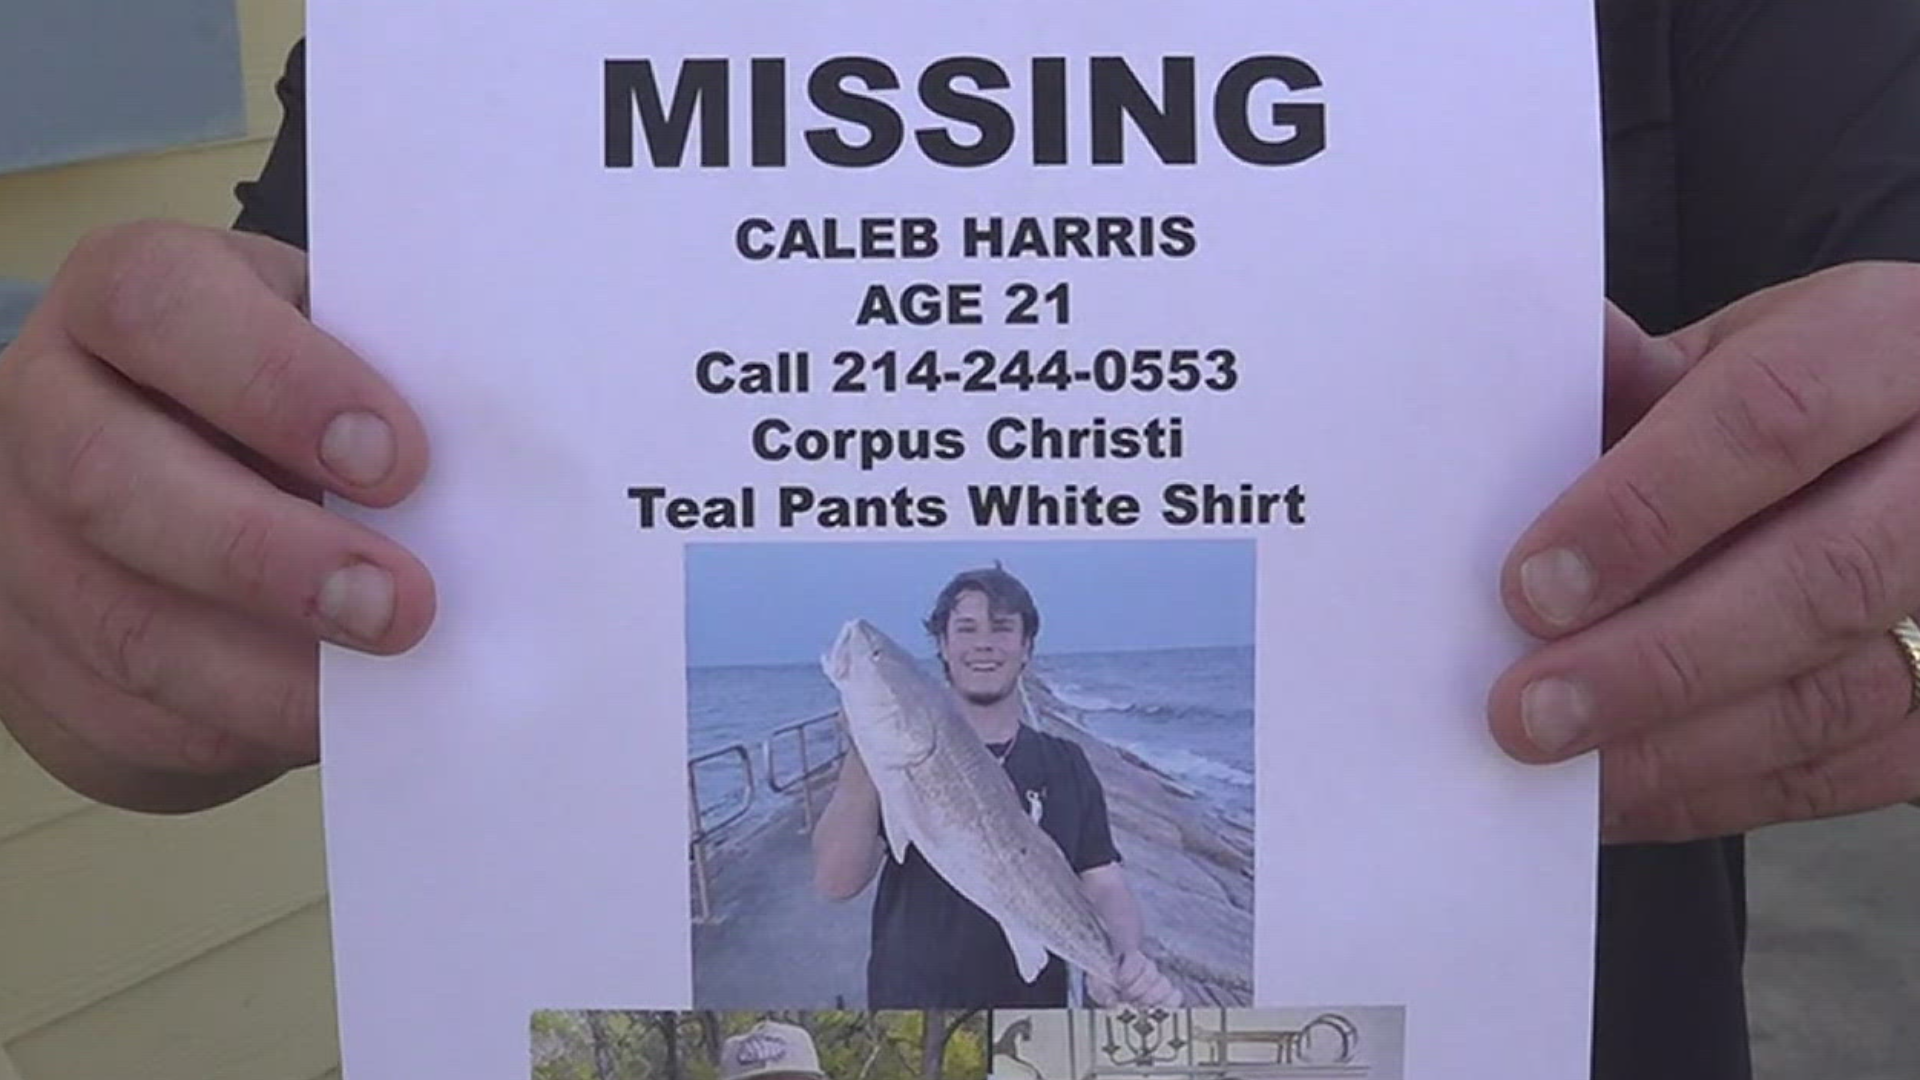 Harris was last seen at an off-campus apartment complex letting his dog out.